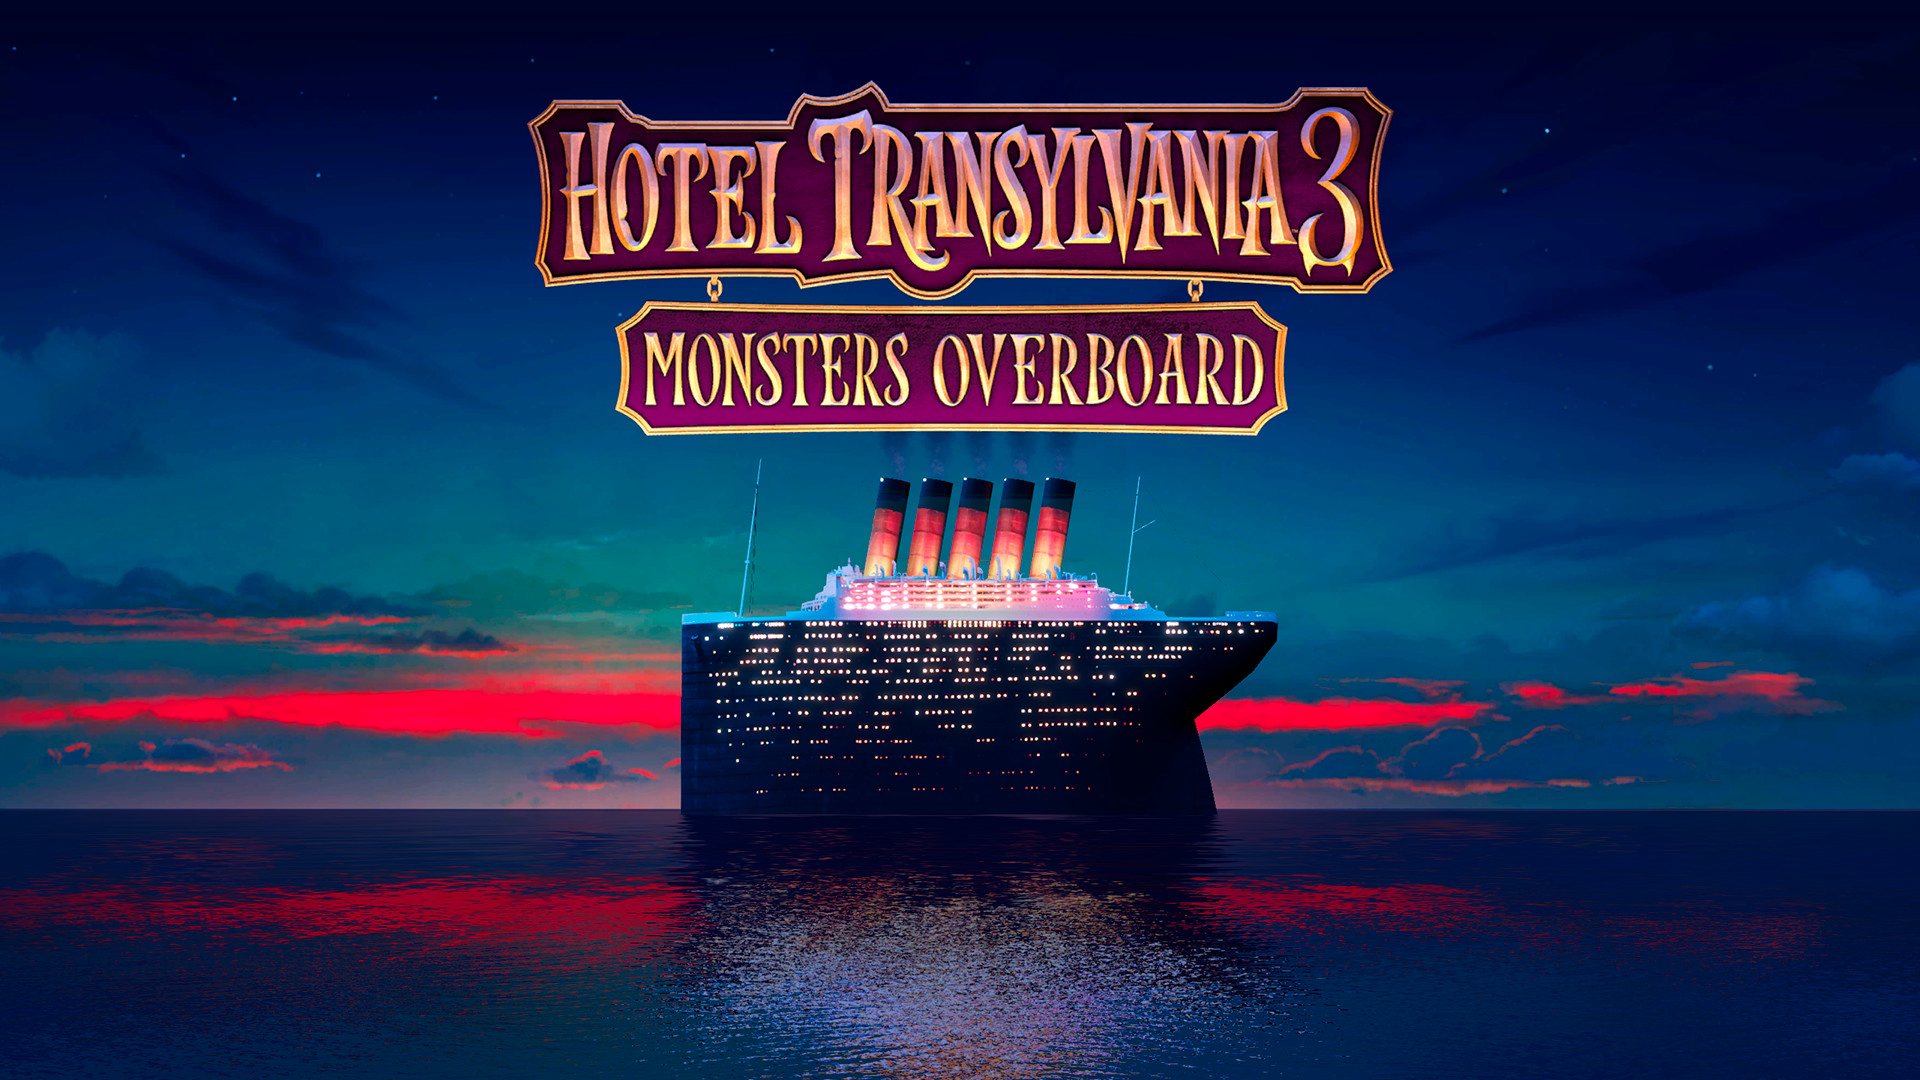 Hotel Transylvania 3: Monsters Overboard Steam CD Key